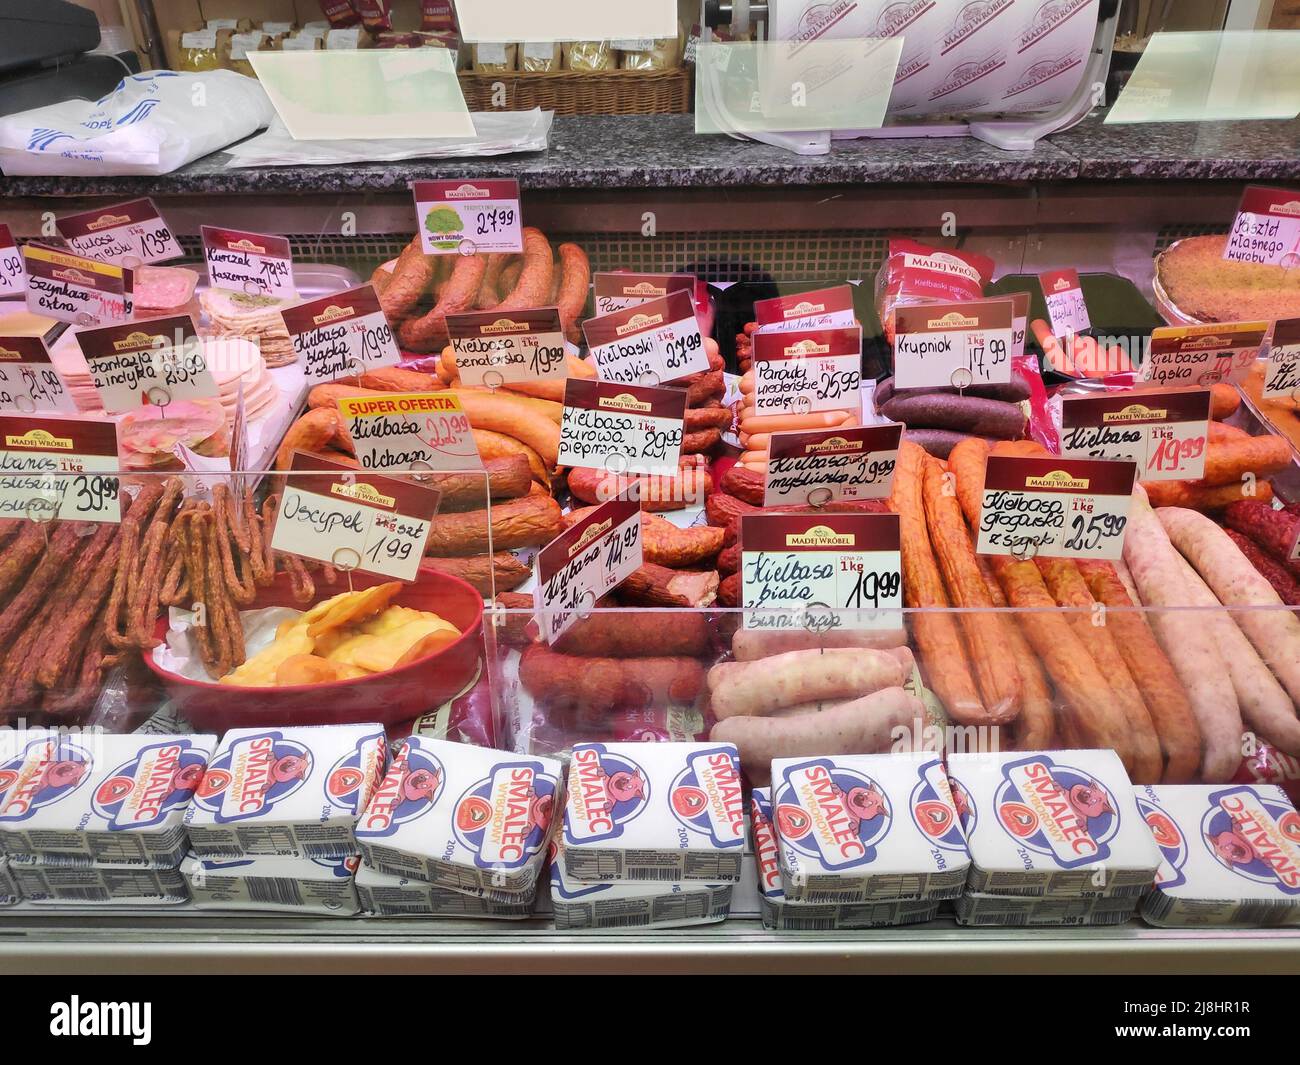 BYTOM, POLAND - JANUARY 19, 2021: Typical local smoked meat deli products, sausages and hot dogs in Bytom, Poland. Stock Photo